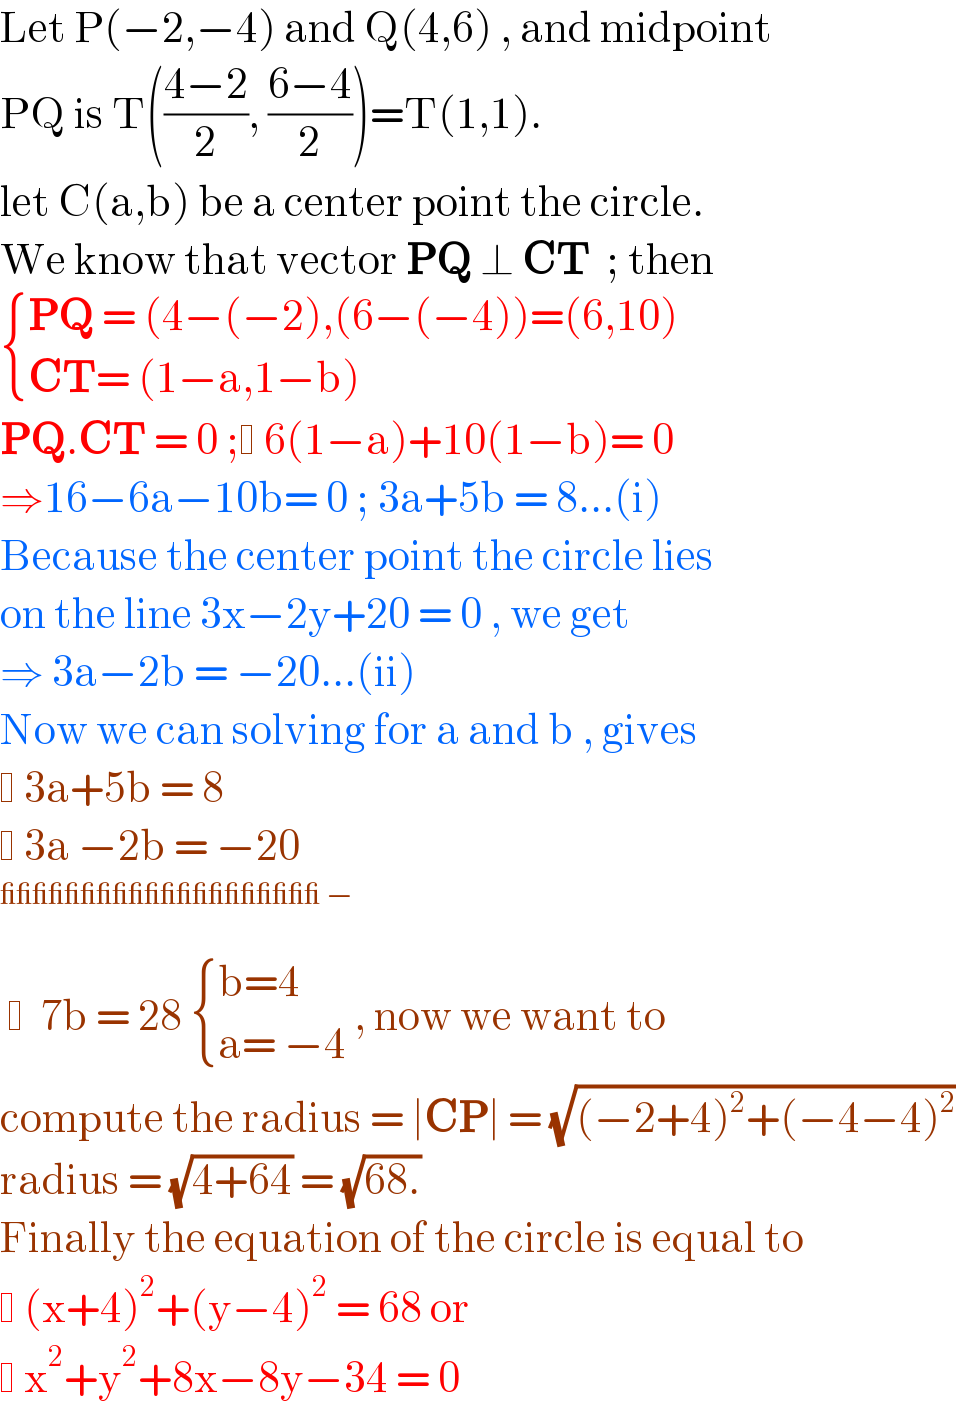 Let P(−2,−4) and Q(4,6) , and midpoint  PQ is T(((4−2)/2), ((6−4)/2))=T(1,1).   let C(a,b) be a center point the circle.  We know that vector PQ ⊥ CT  ; then   { ((PQ = (4−(−2),(6−(−4))=(6,10))),((CT= (1−a,1−b))) :}  PQ.CT = 0 ;  6(1−a)+10(1−b)= 0  ⇒16−6a−10b= 0 ; 3a+5b = 8...(i)  Because the center point the circle lies  on the line 3x−2y+20 = 0 , we get   ⇒ 3a−2b = −20...(ii)  Now we can solving for a and b , gives    3a+5b = 8    3a −2b = −20        7b = 28  { ((b=4)),((a= −4)) :} , now we want to  compute the radius = ∣CP∣ = (√((−2+4)^2 +(−4−4)^2 ))  radius = (√(4+64)) = (√(68.))  Finally the equation of the circle is equal to    (x+4)^2 +(y−4)^2  = 68 or     x^2 +y^2 +8x−8y−34 = 0  